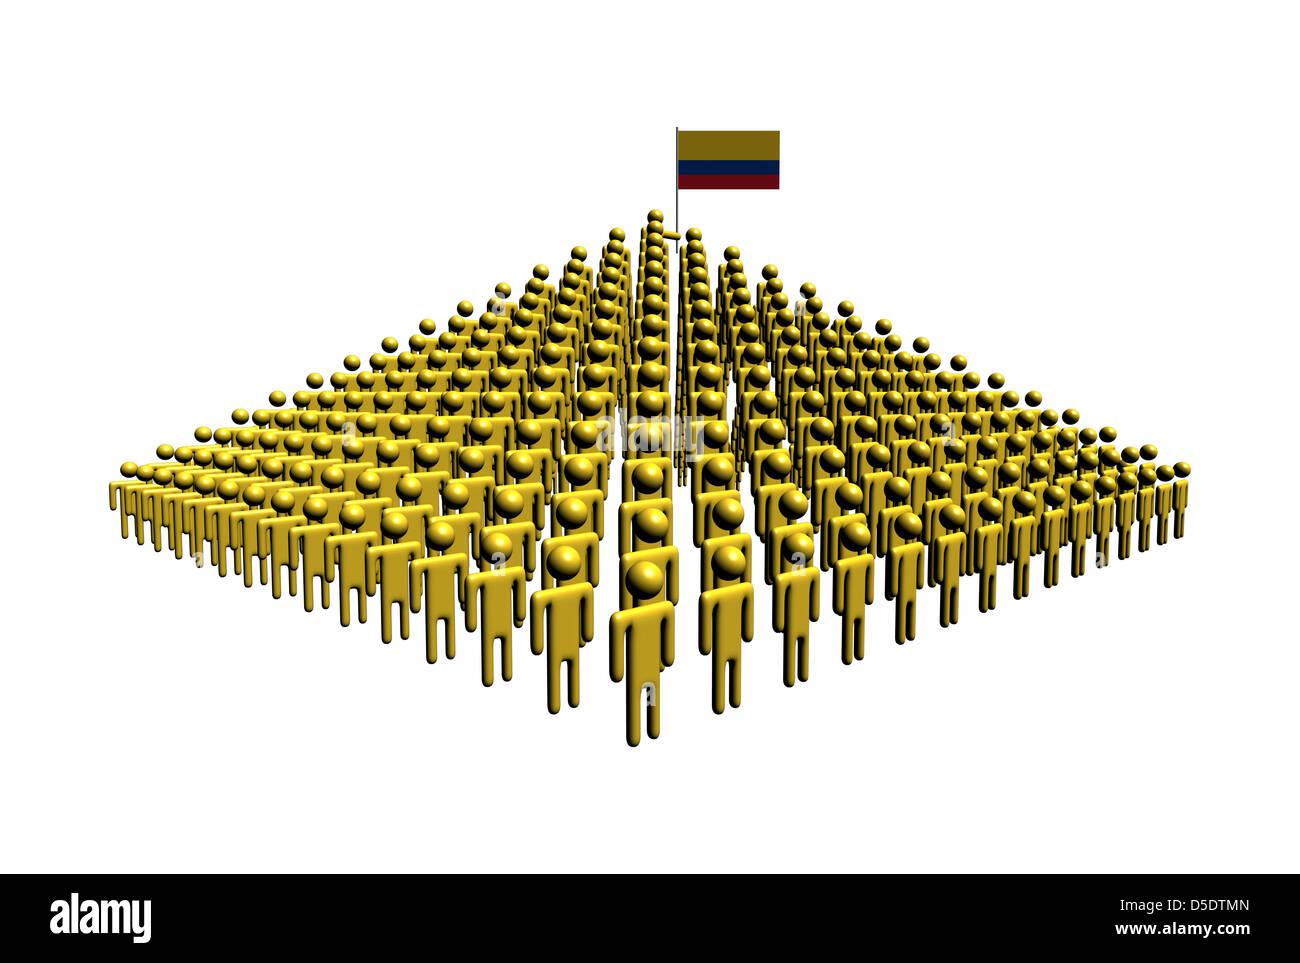 Pyramid of abstract people with Colombian flag illustration Stock Photo